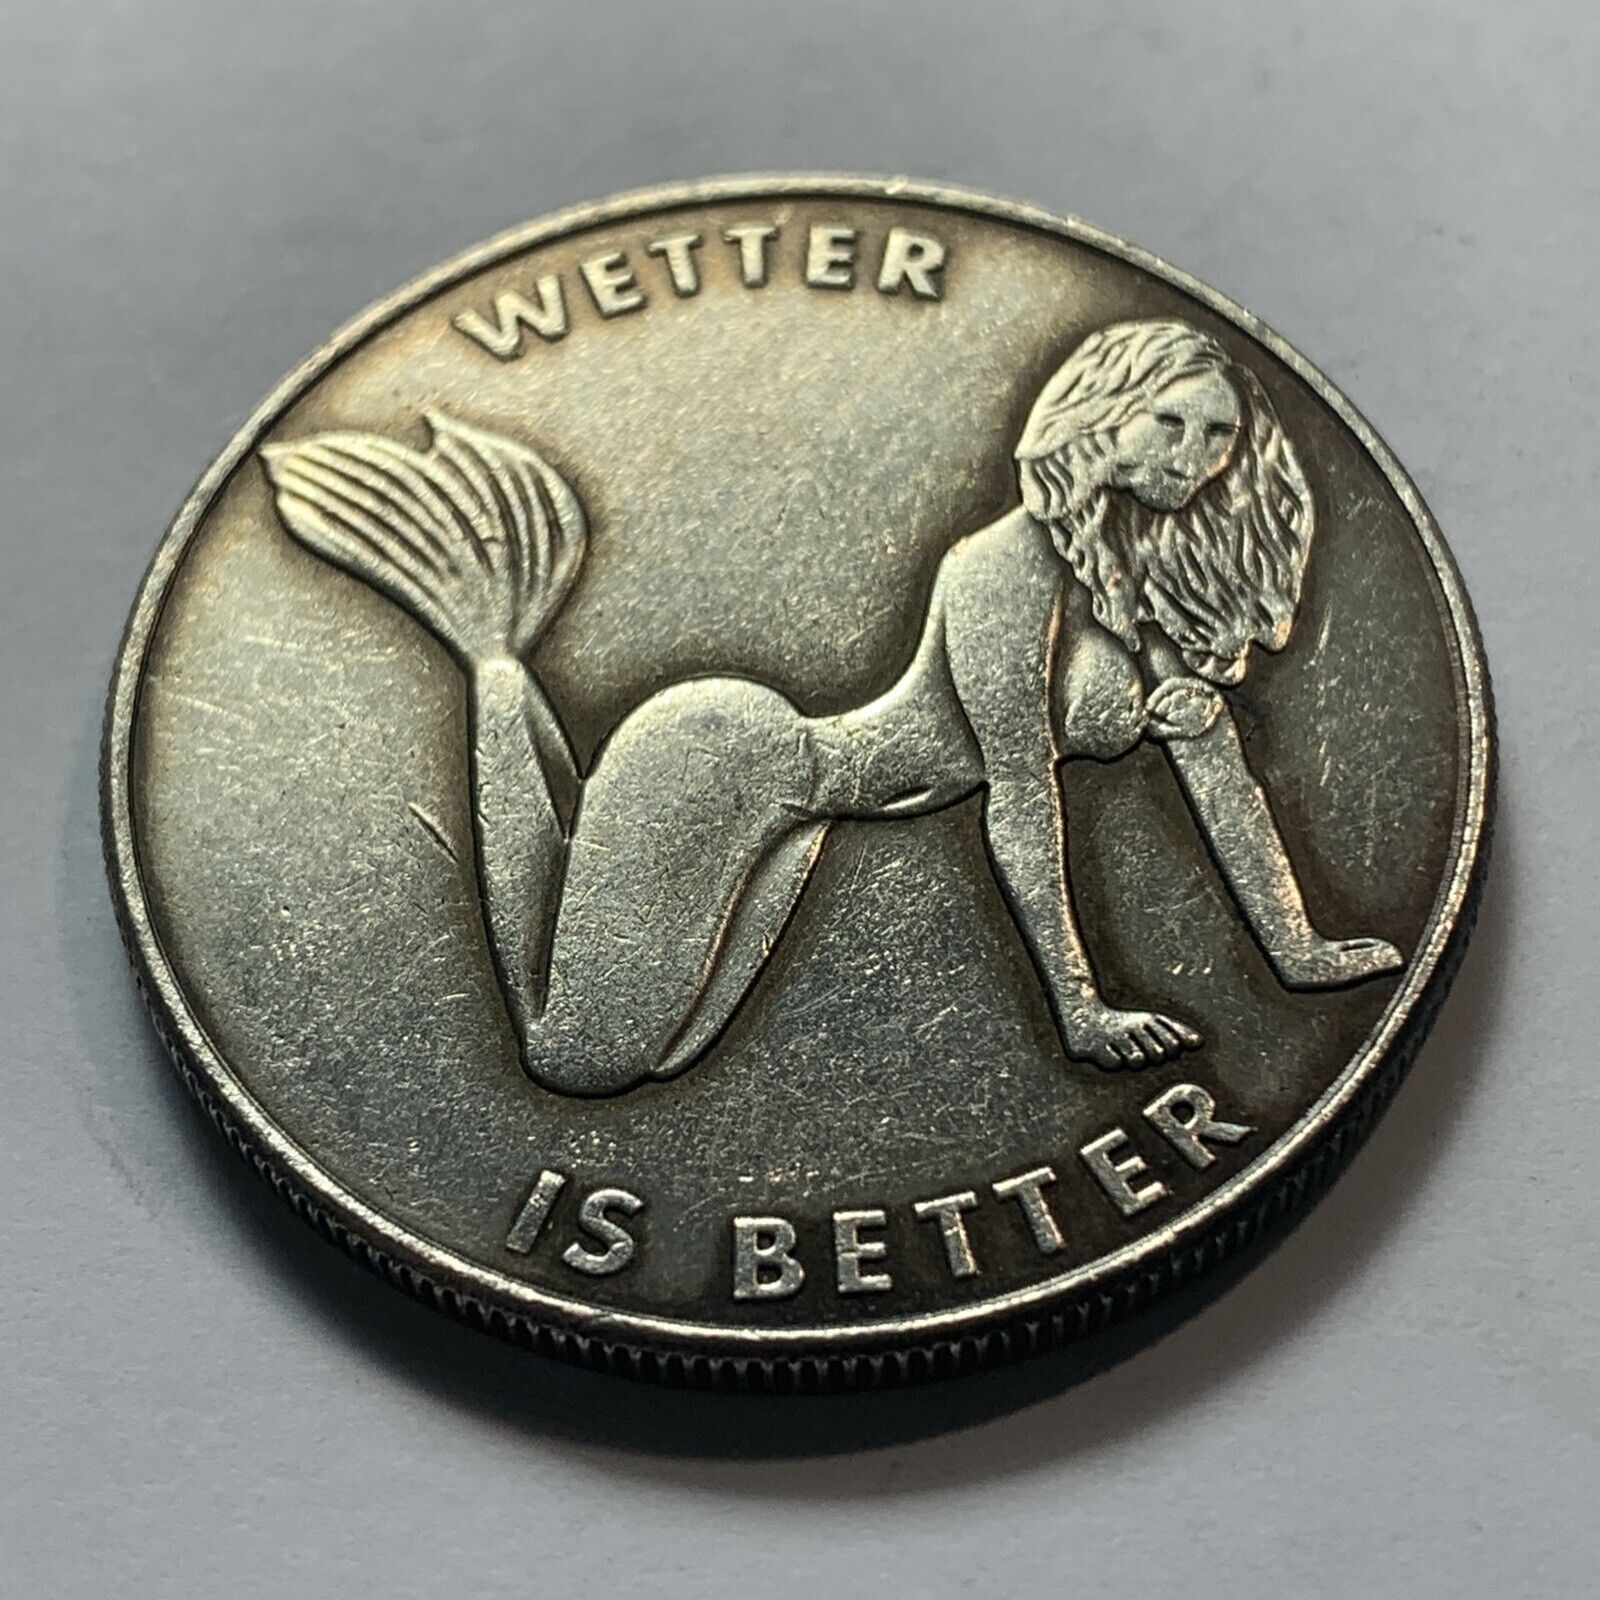 Sexy Mermaid Wetter is Better Lucky Pocket Heads Tails Flip Token Challenge Coin